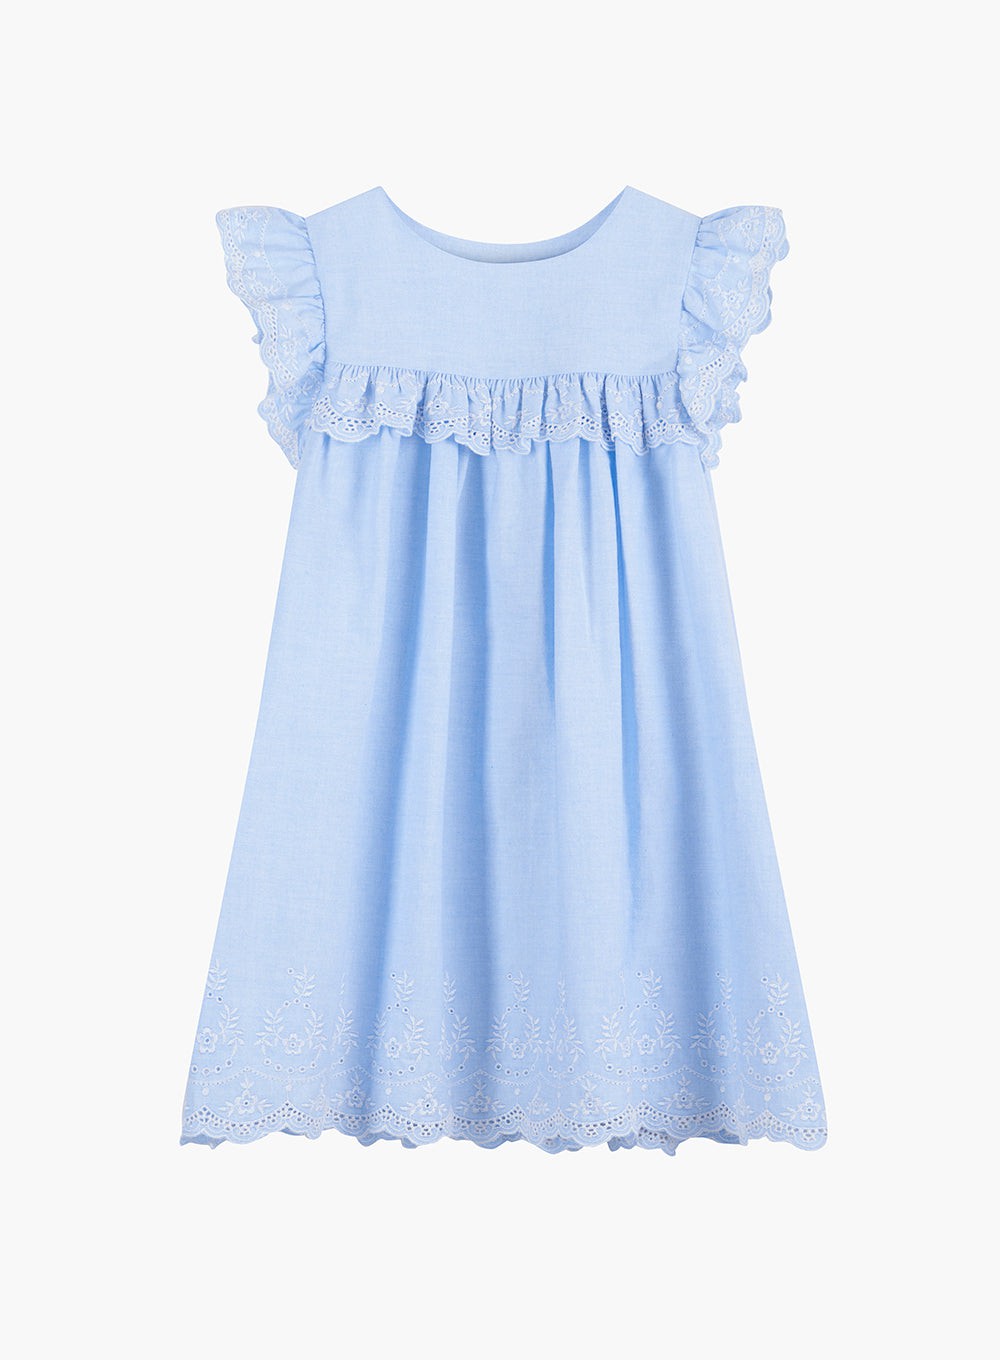 Confiture Dress Embroidered Chambray Dress